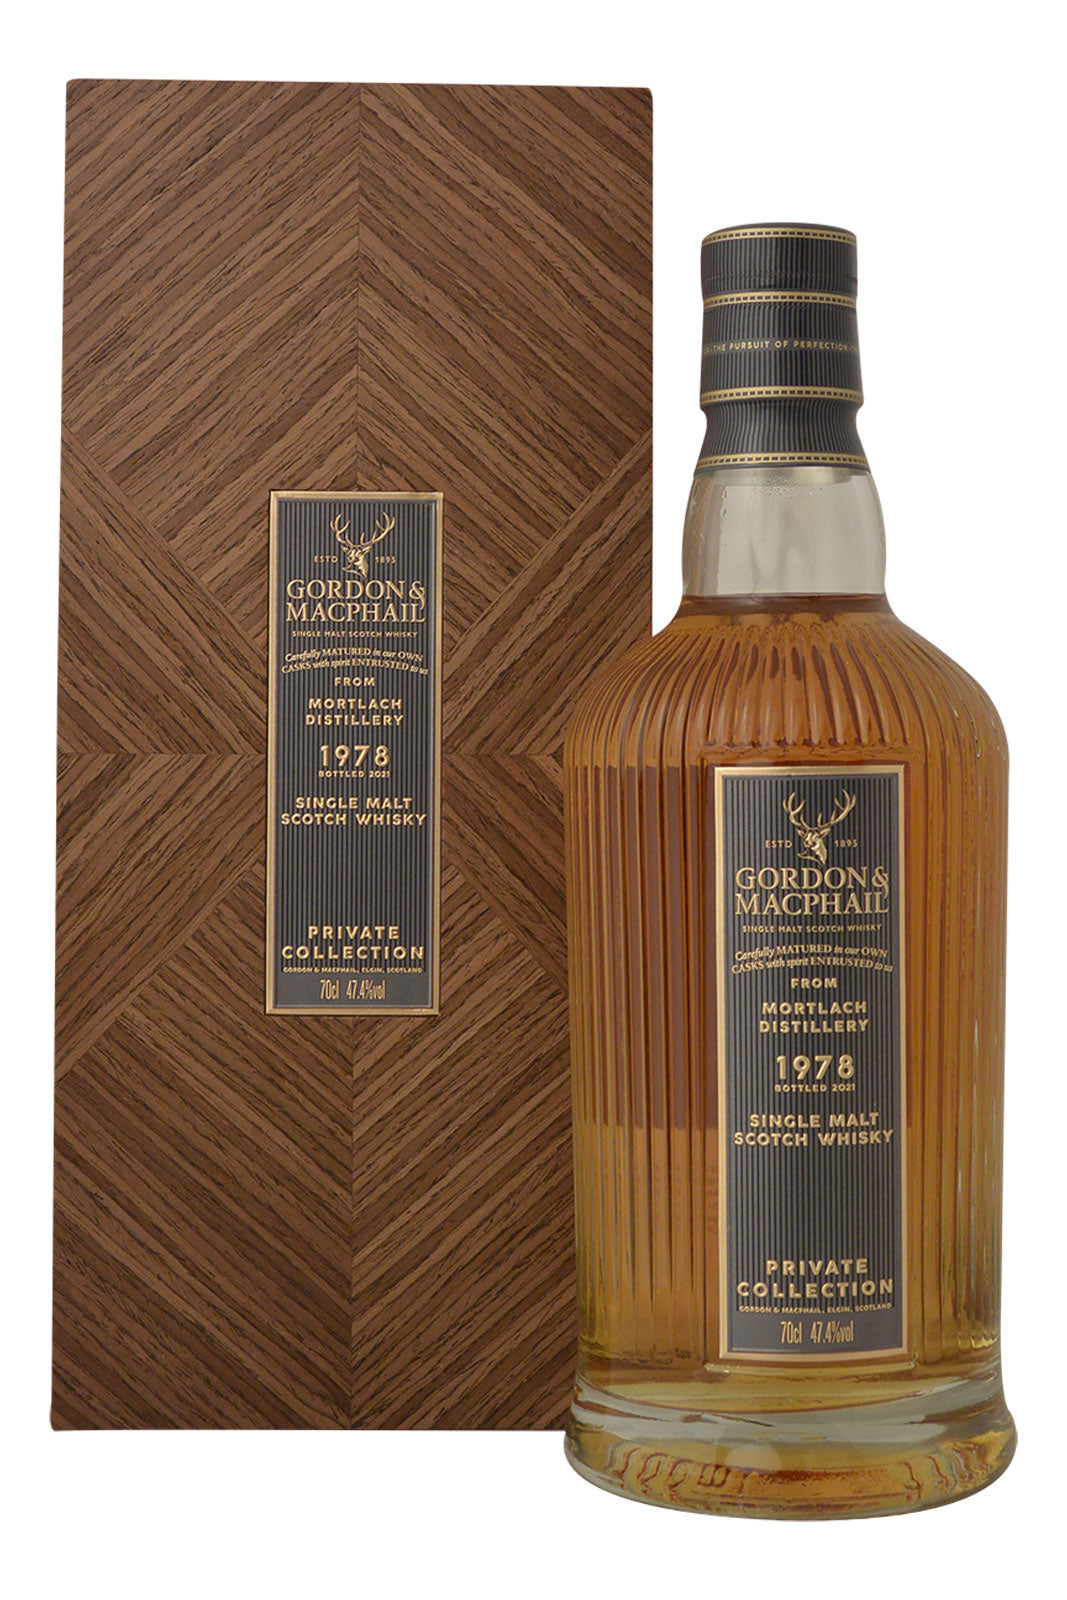 Mortlach 1978 Gordon & MacPhail Private Collection